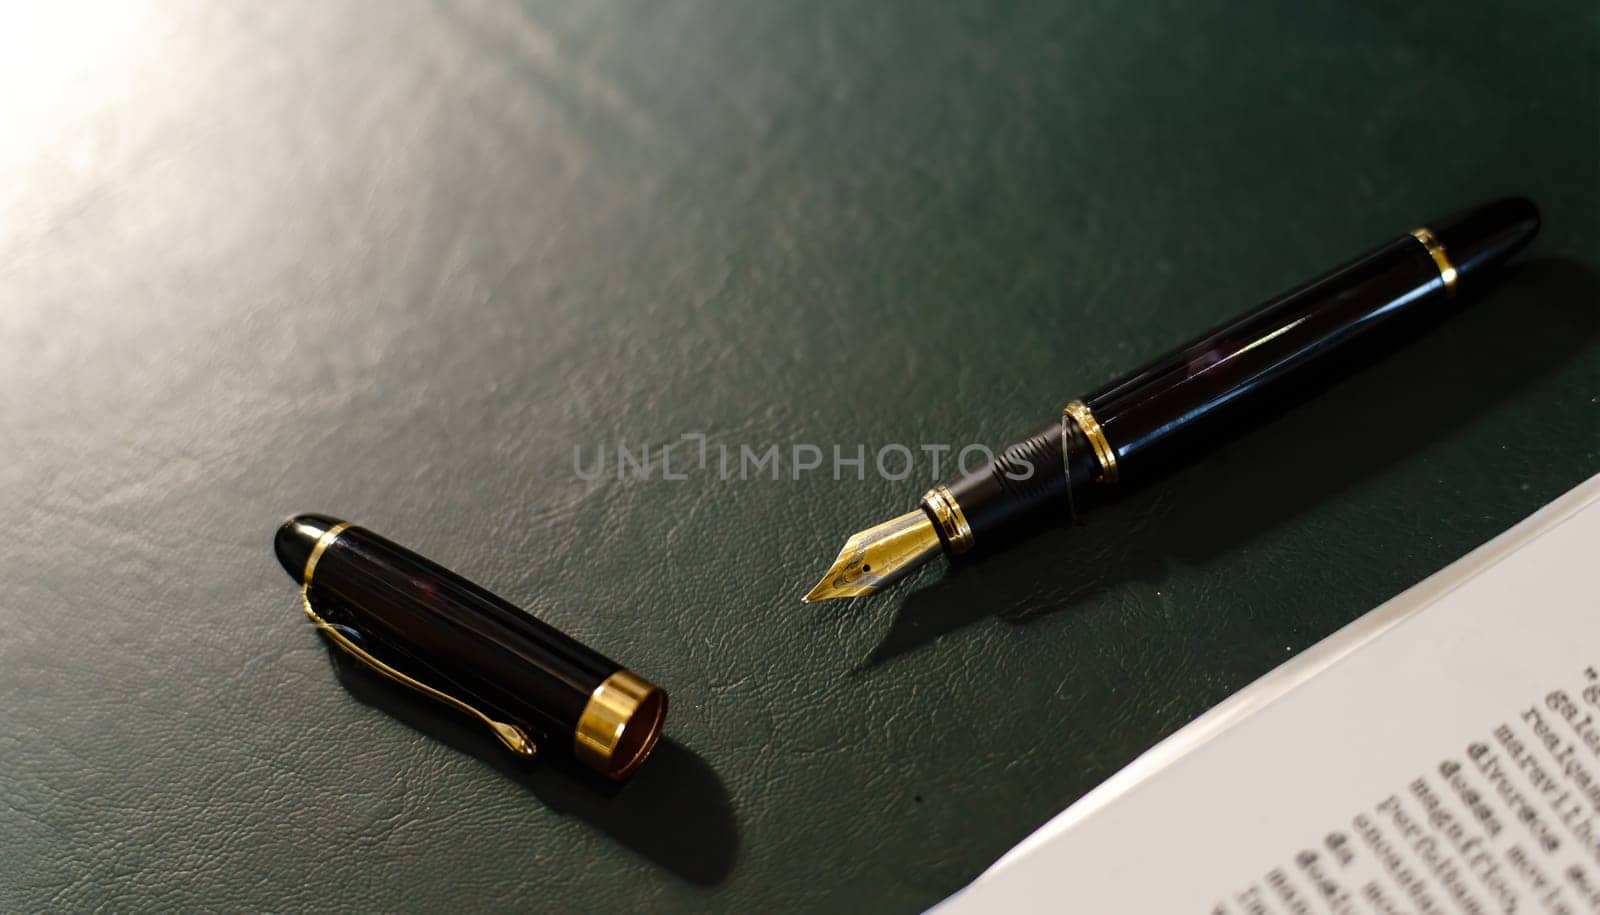 A fountain pen lays open on a desk beside a typed paper, symbolizing the contrast between past and future. The lighting creates shadows and space for text.